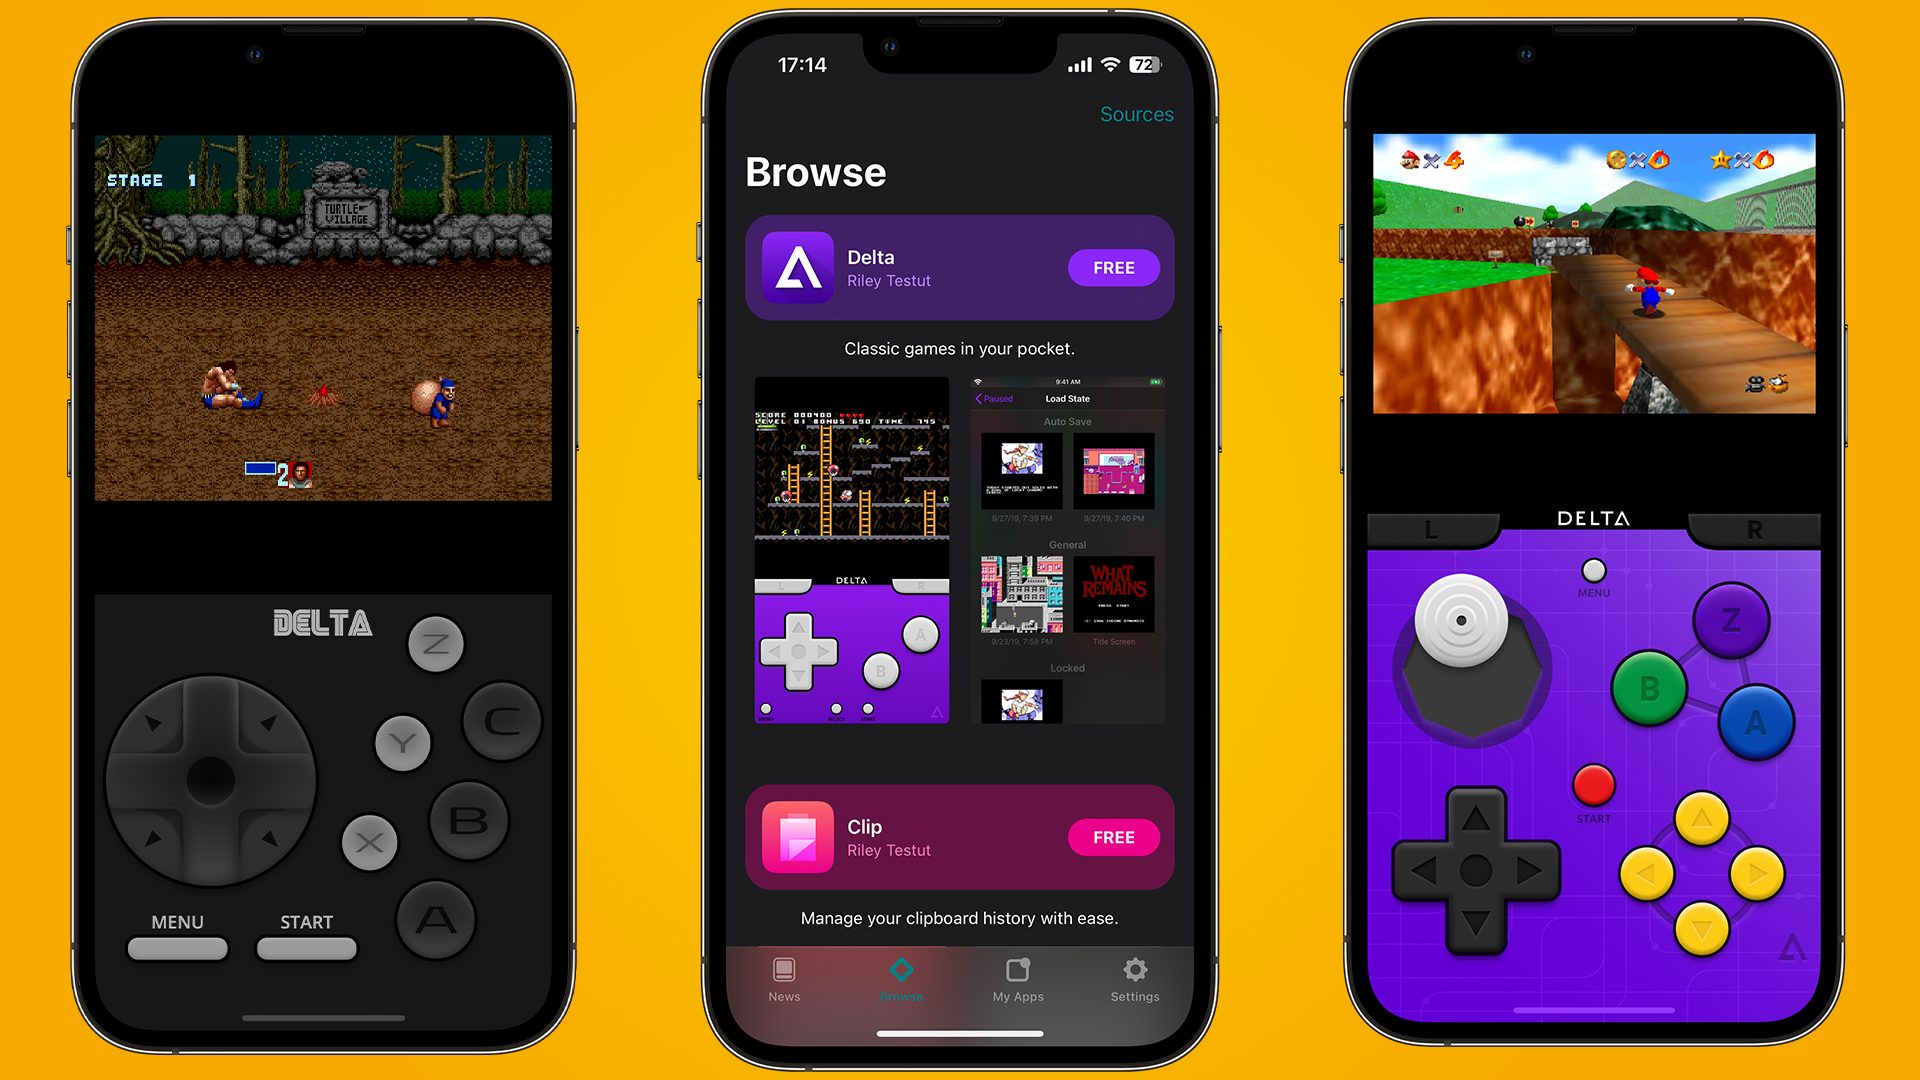 GitHub - rileytestut/Delta: Delta is an all-in-one classic video game  emulator for non-jailbroken iOS devices.